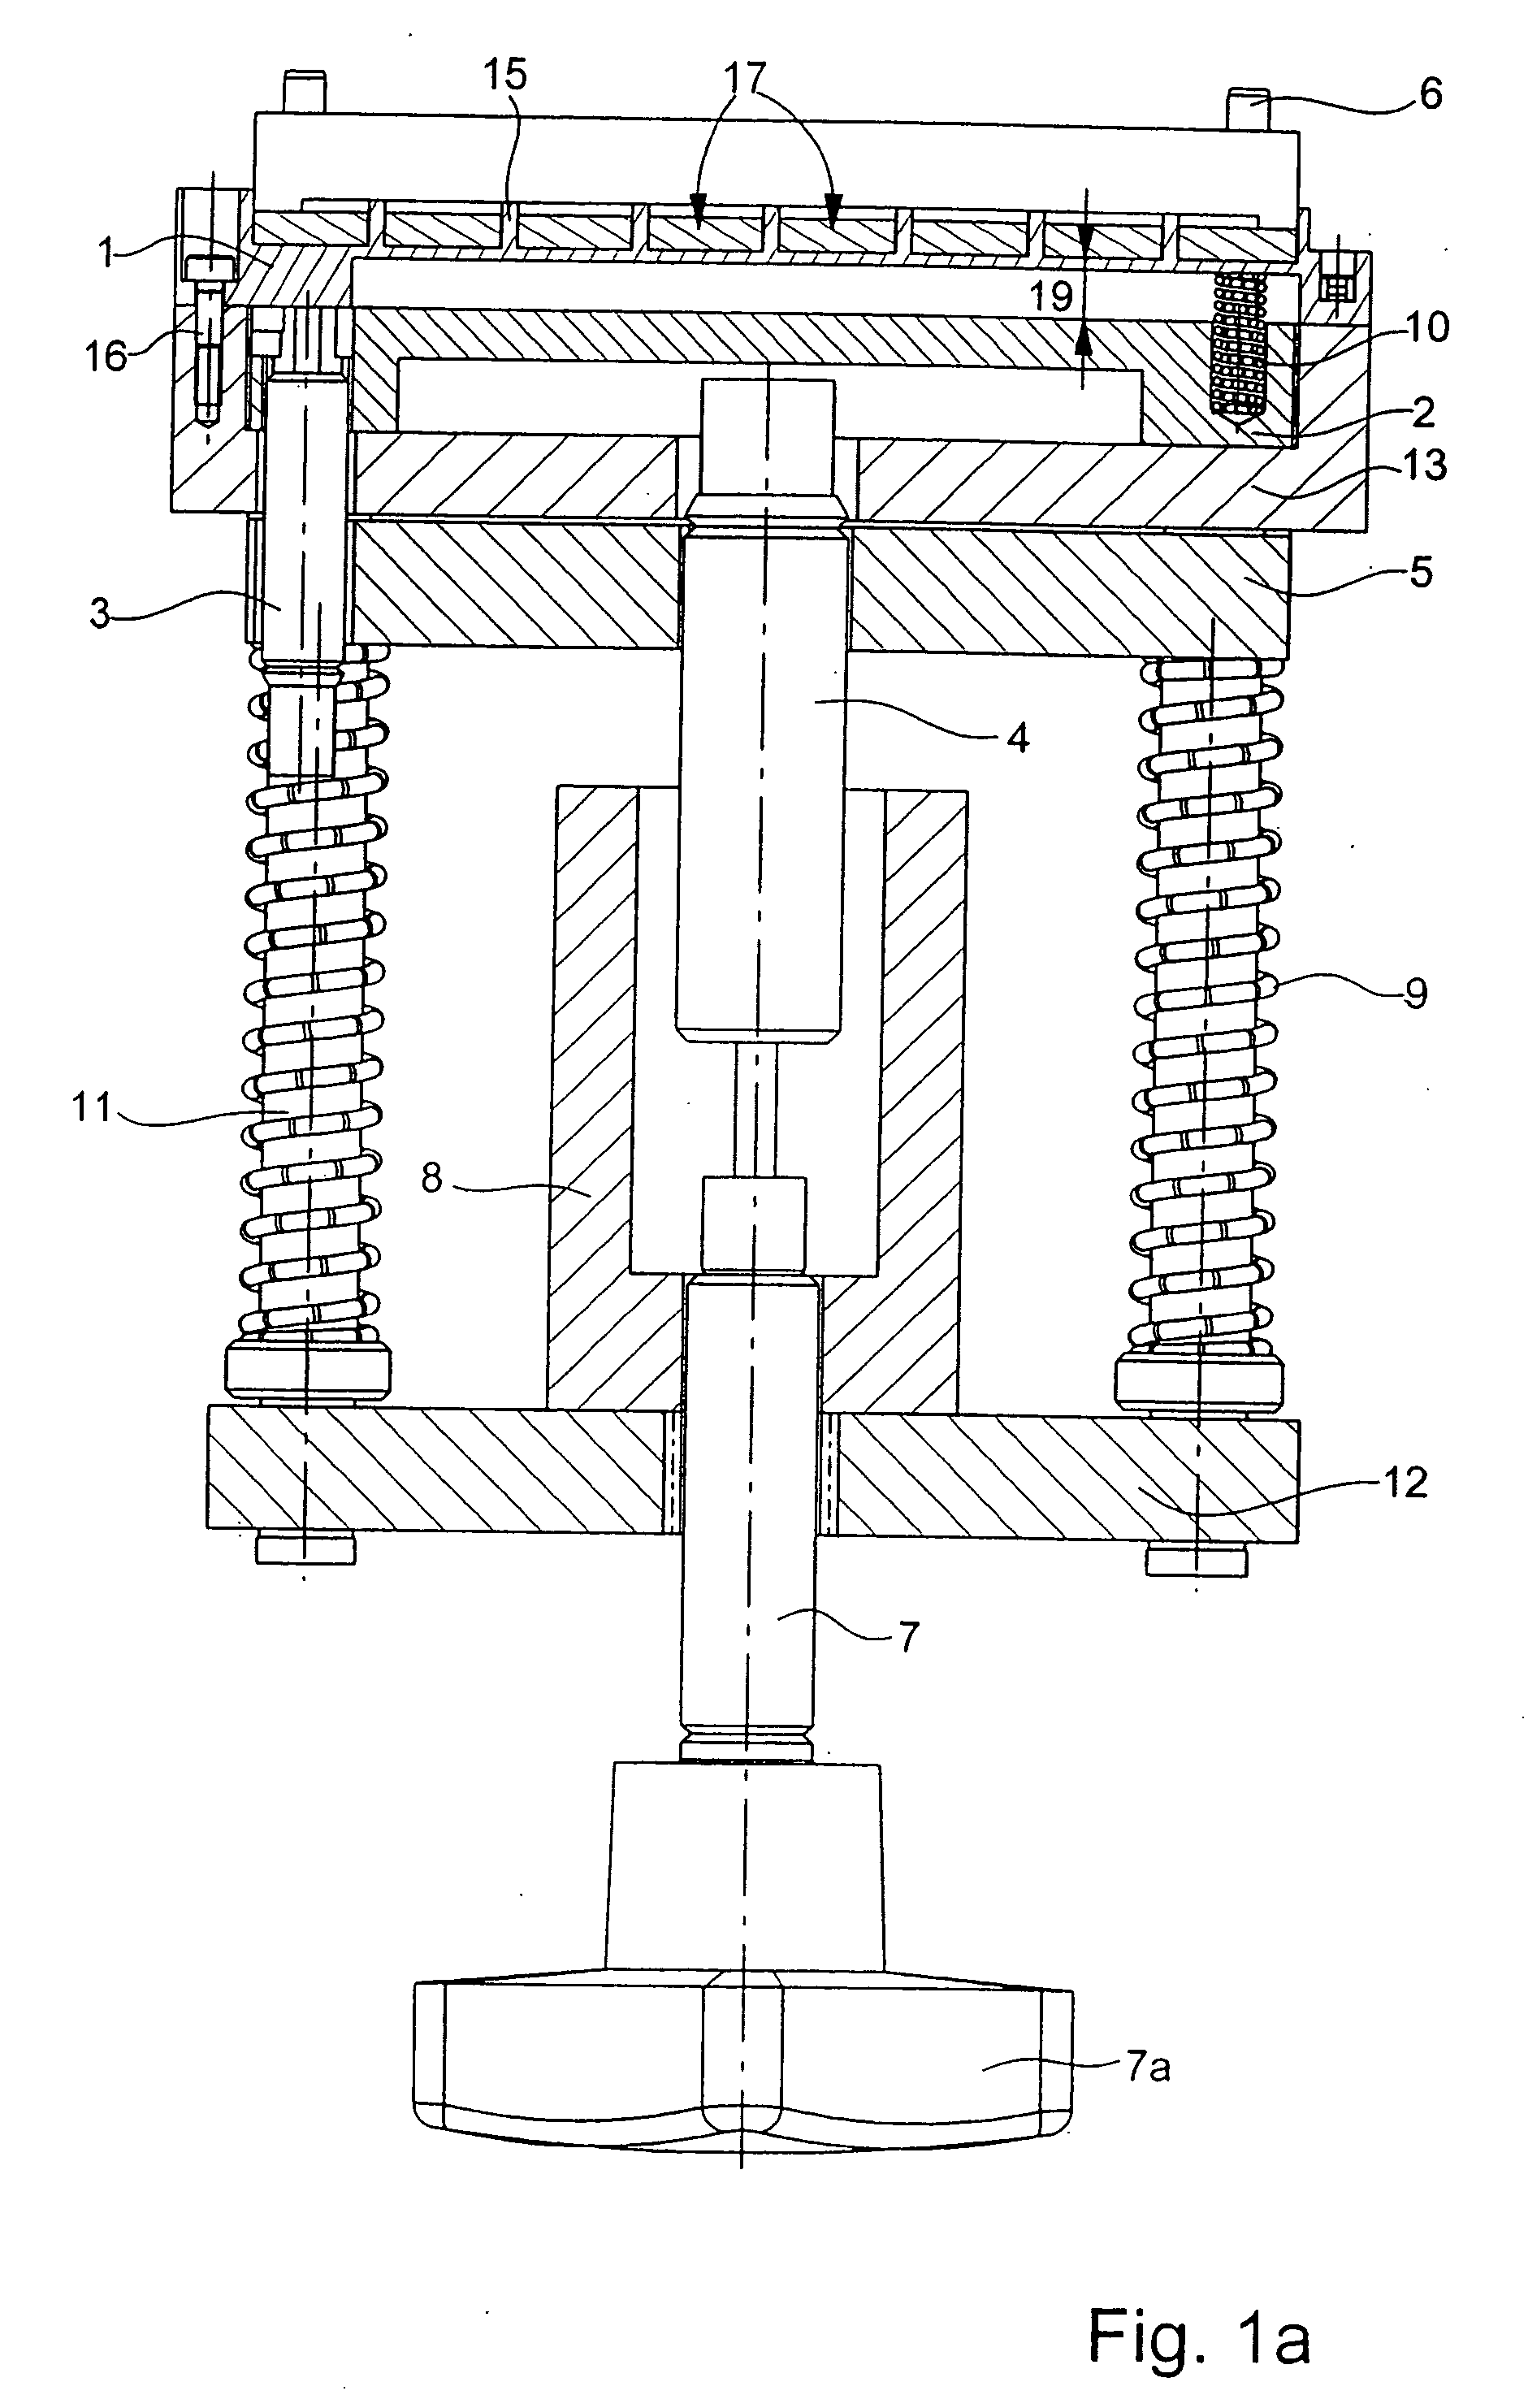 Method and device for positioning and affixing magnets on a magnetic yoke member of a motor